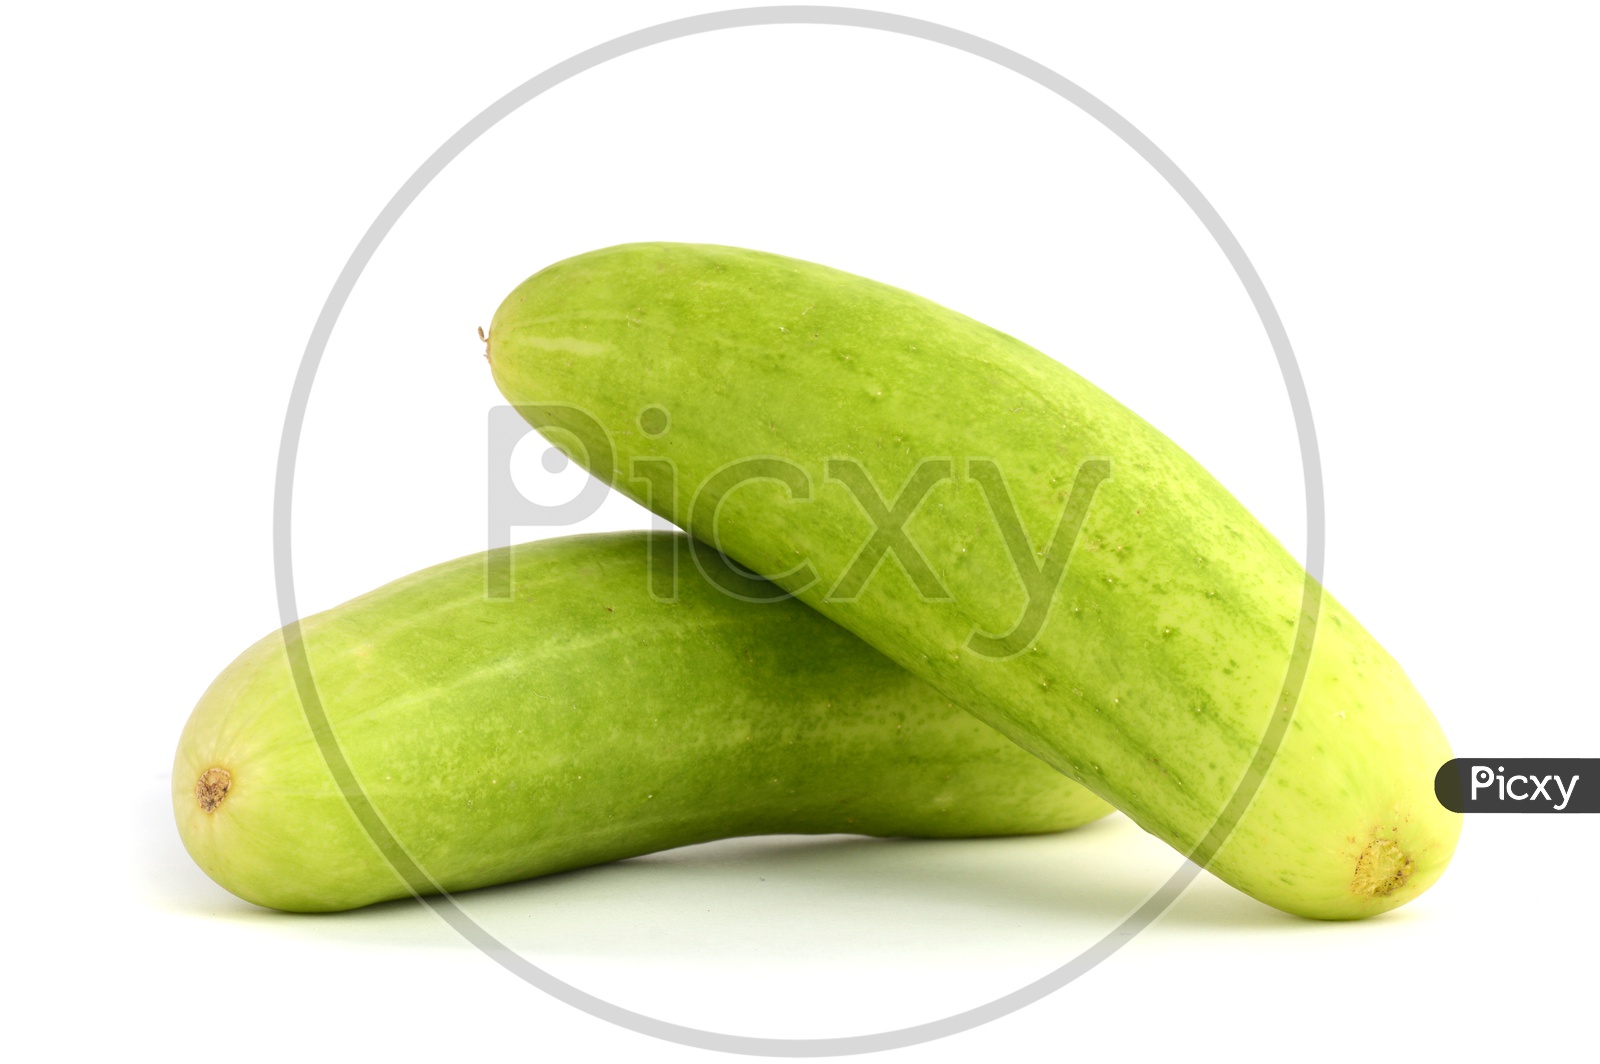 Fresh Green Cucumber Or Keera on an Isolated White Background